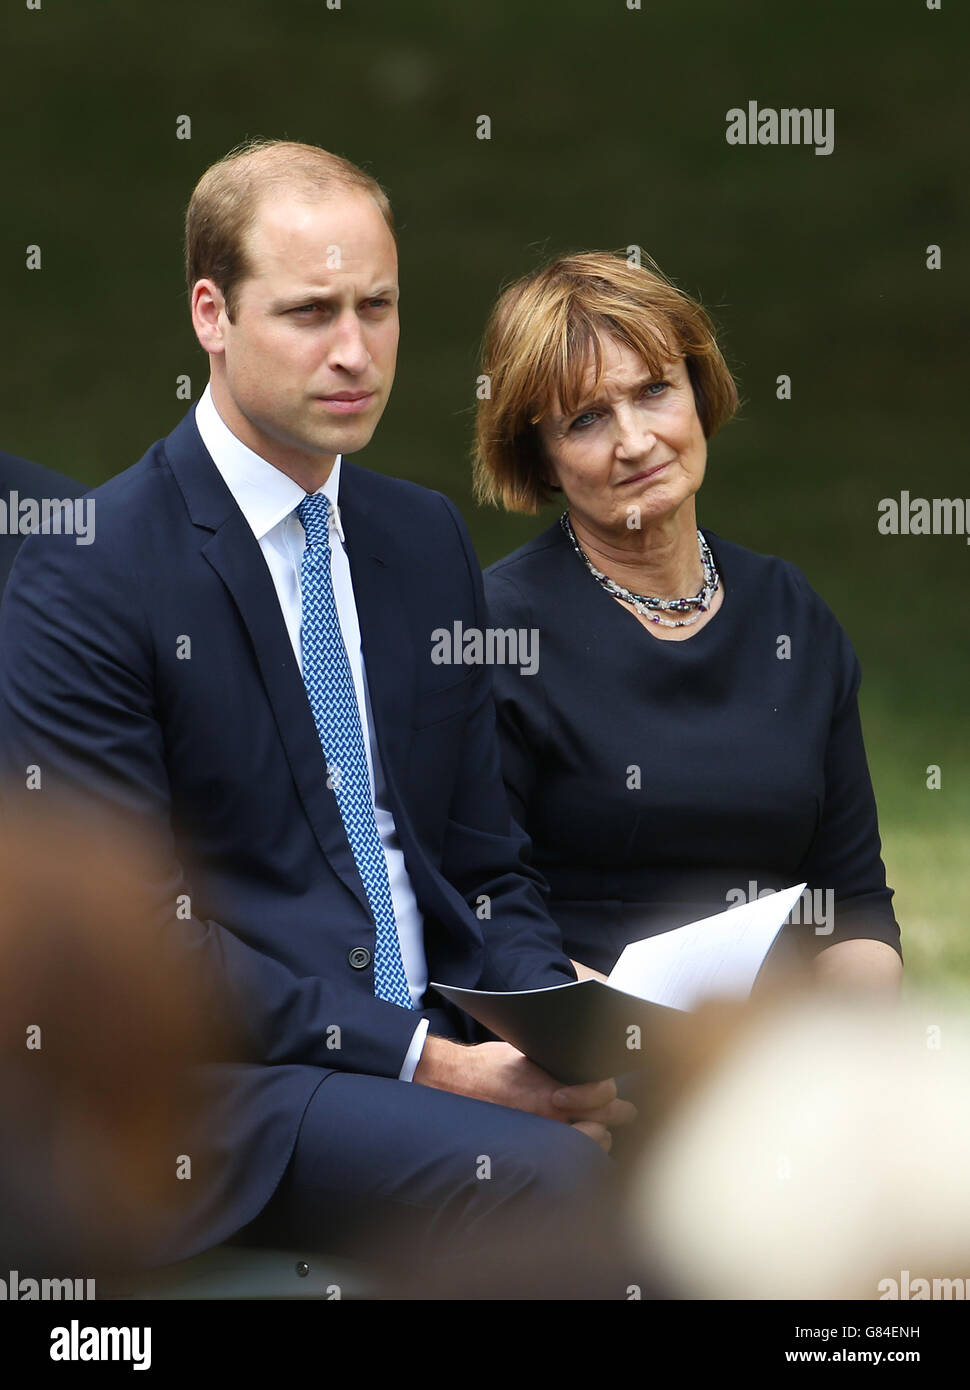 The Duke of Cambridge and Labour MP Tessa Jowell before laying a wreath at the July 7 memorial in Hyde Park, London, as Britain remembers the July 7 attacks amid a welter of warnings about the enduring and changing threat from terrorism a decade on. Stock Photo